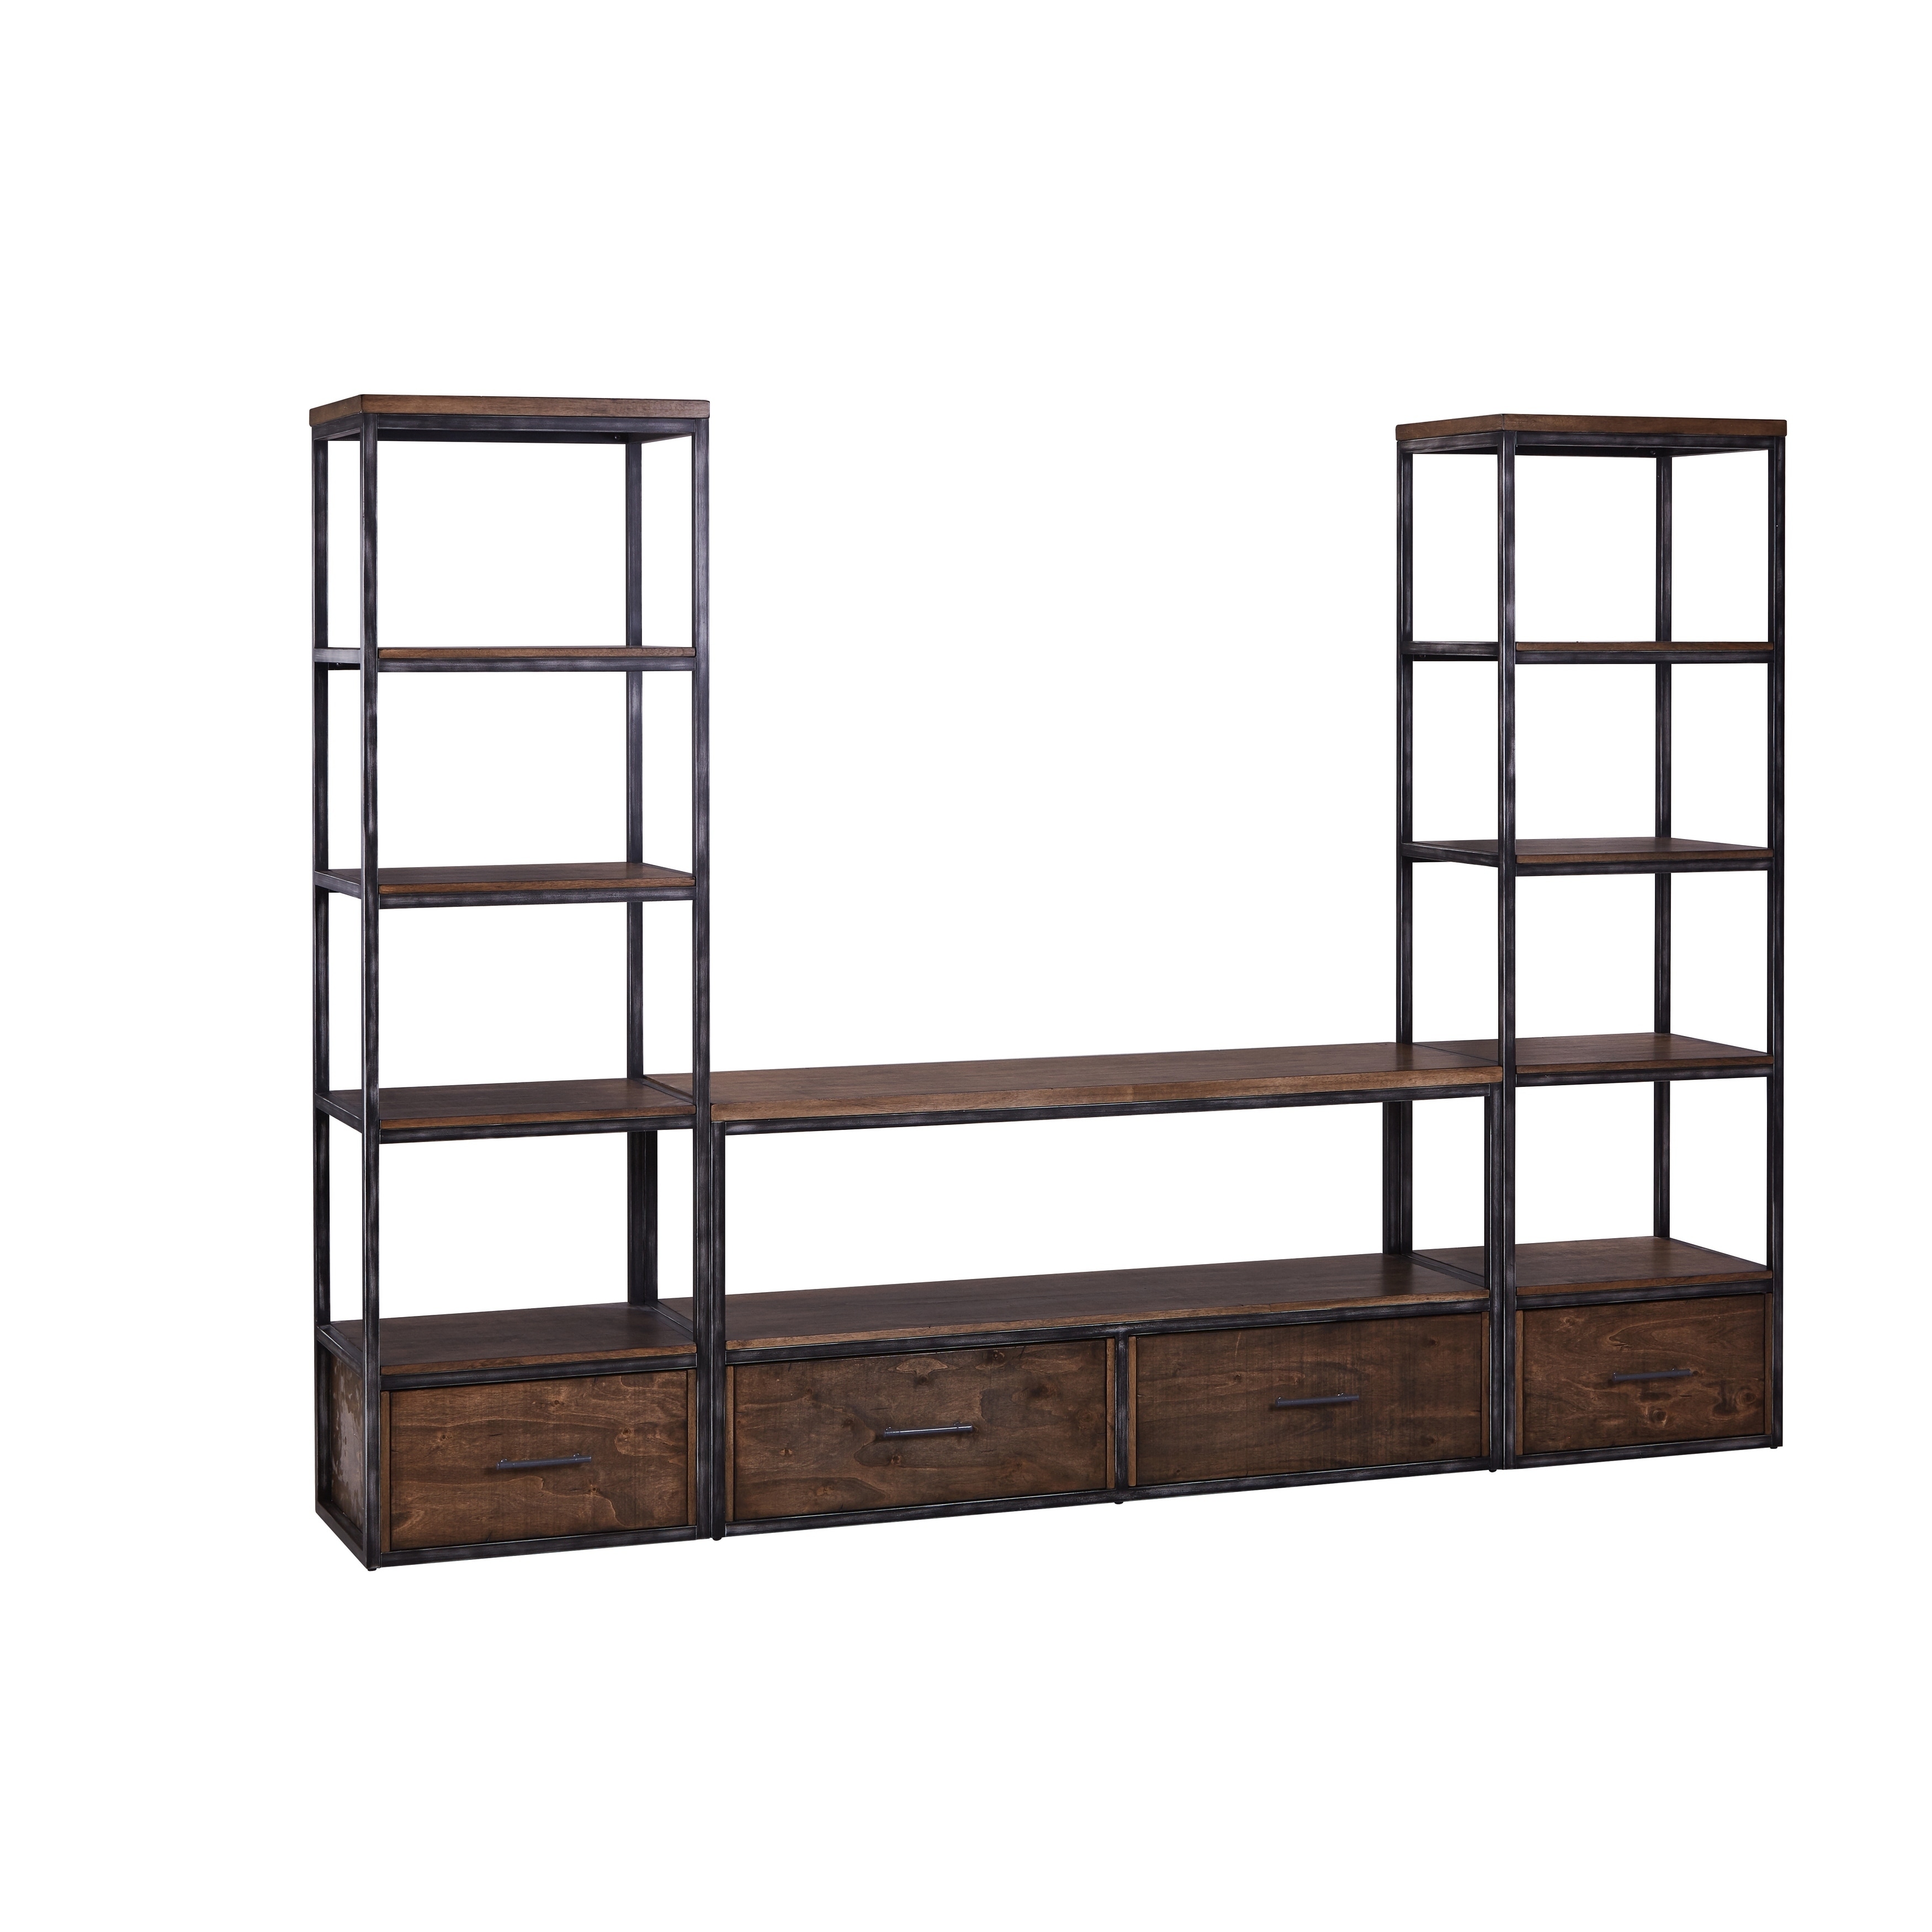 Shop Lane Black And Warm Brown Pier Tower Bookcase Overstock